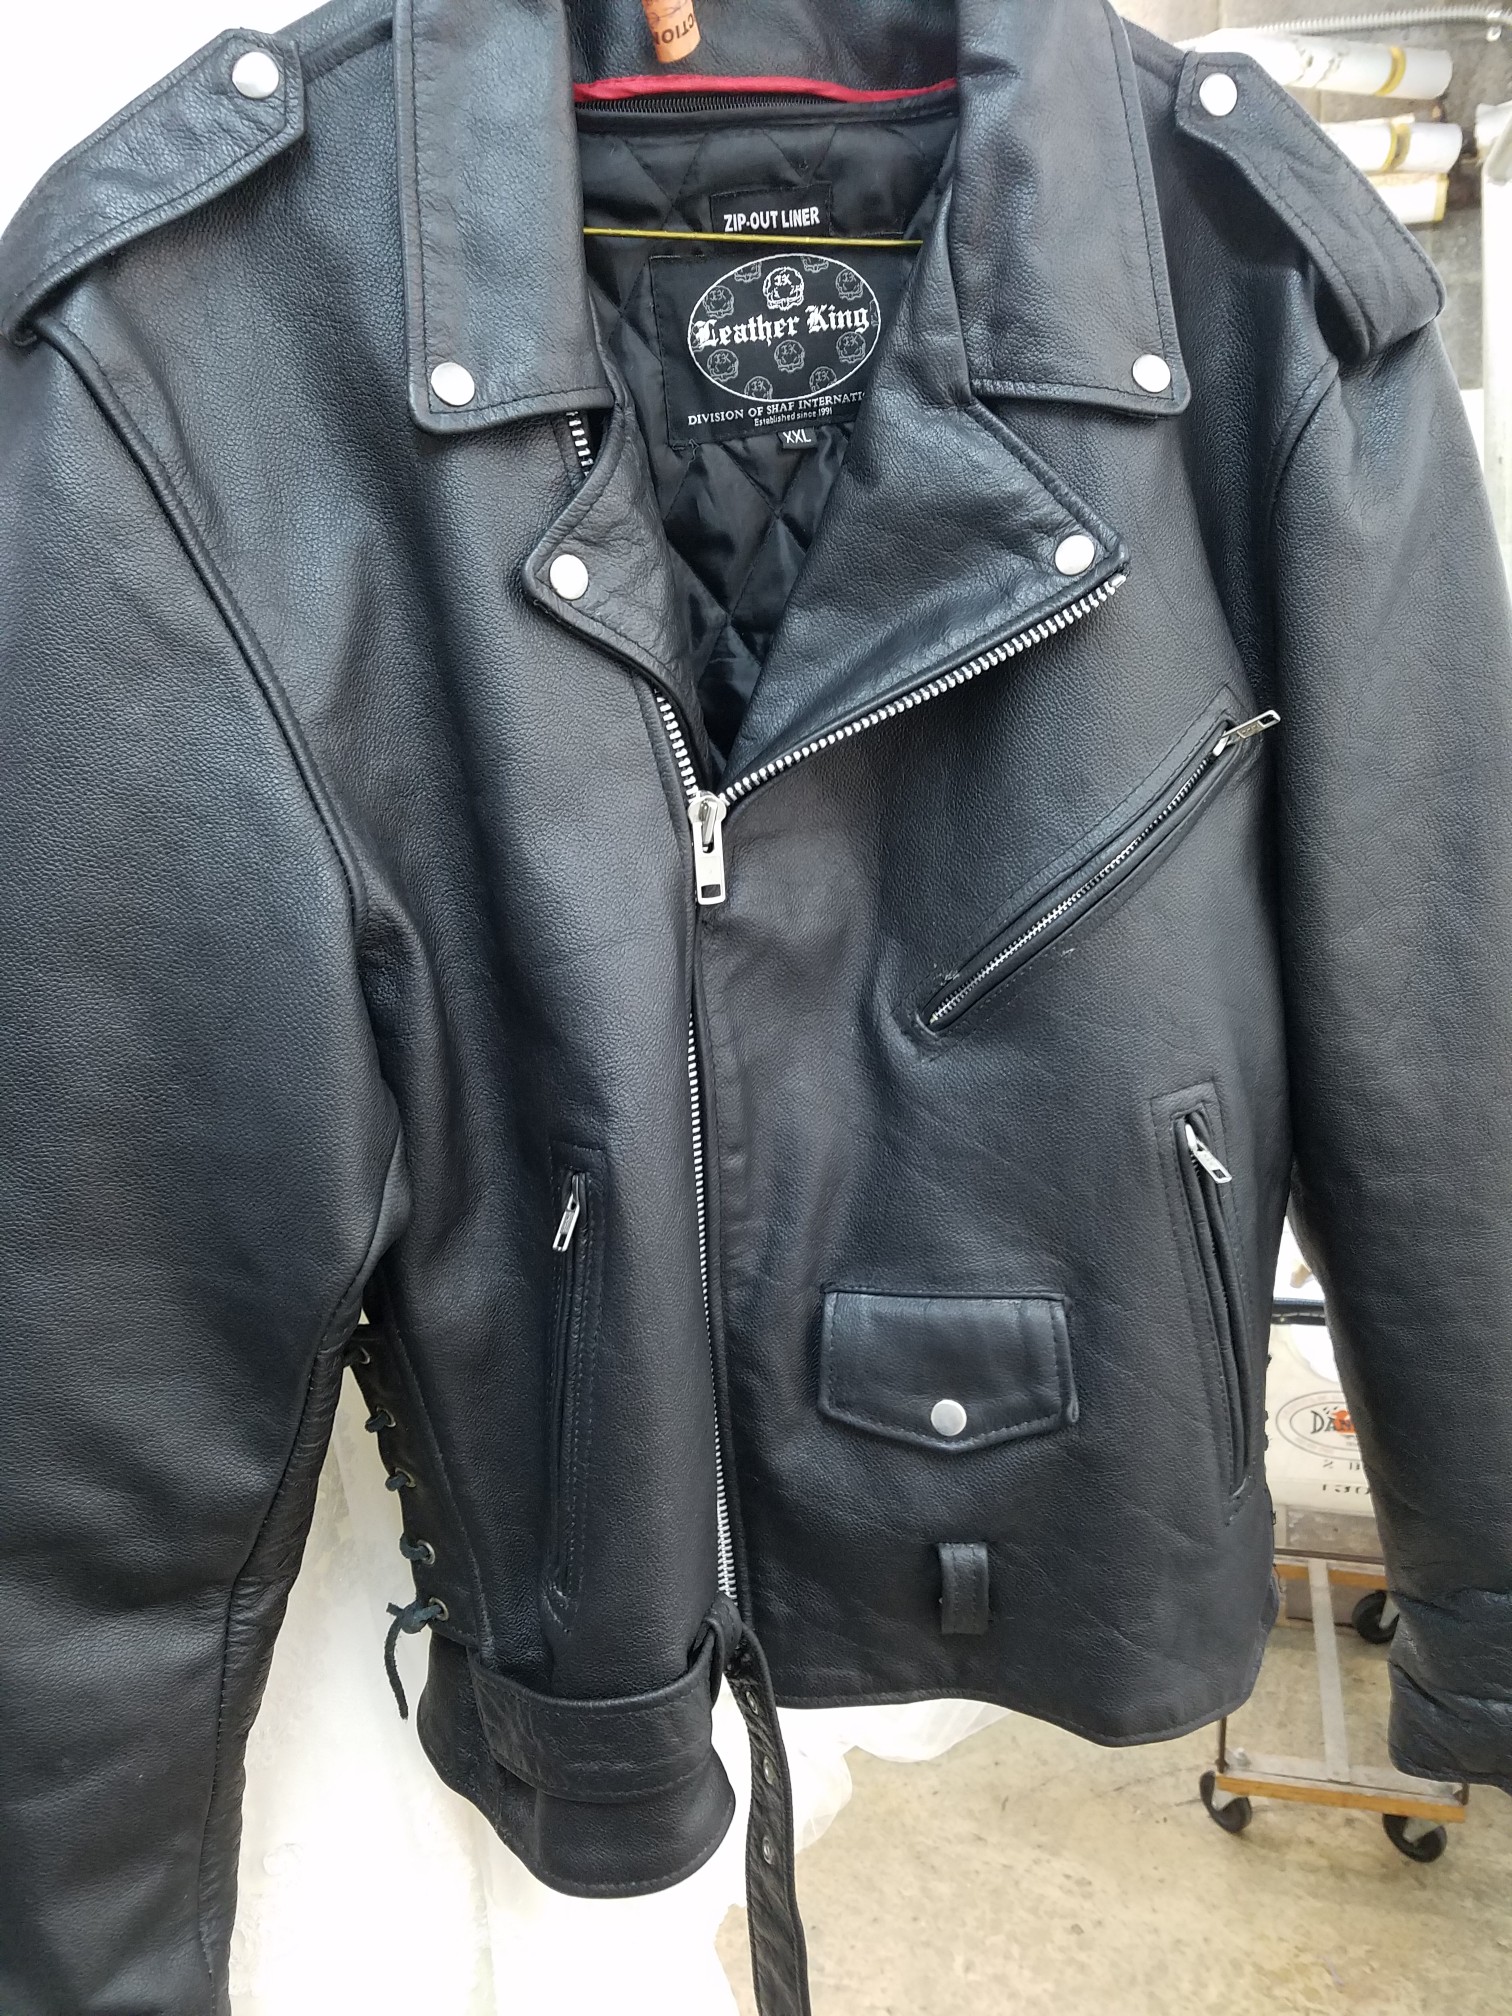 After Cleaning Jacket